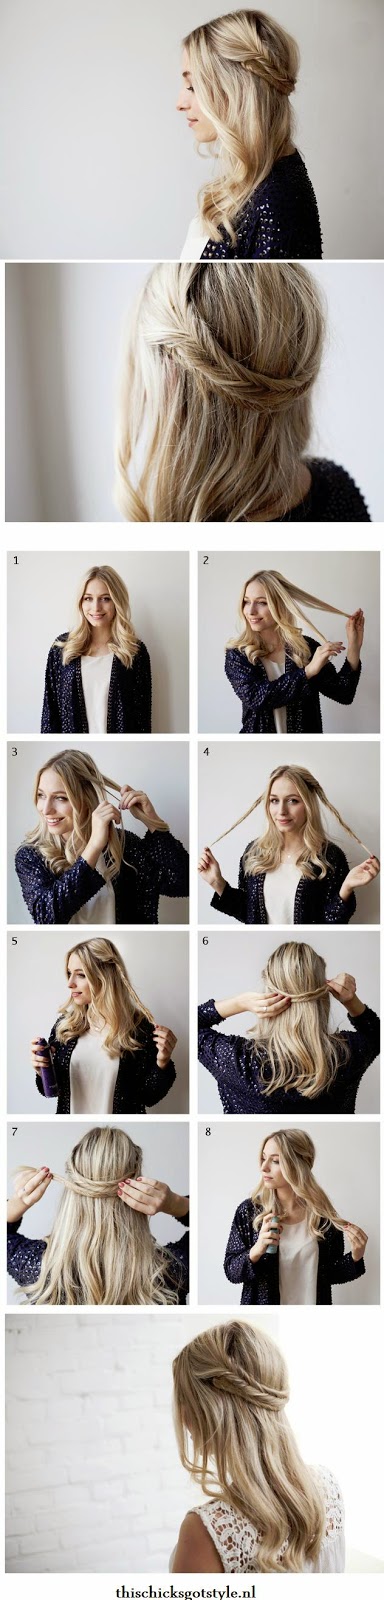 hairstyles and women attire 5 easy hair tutorials for